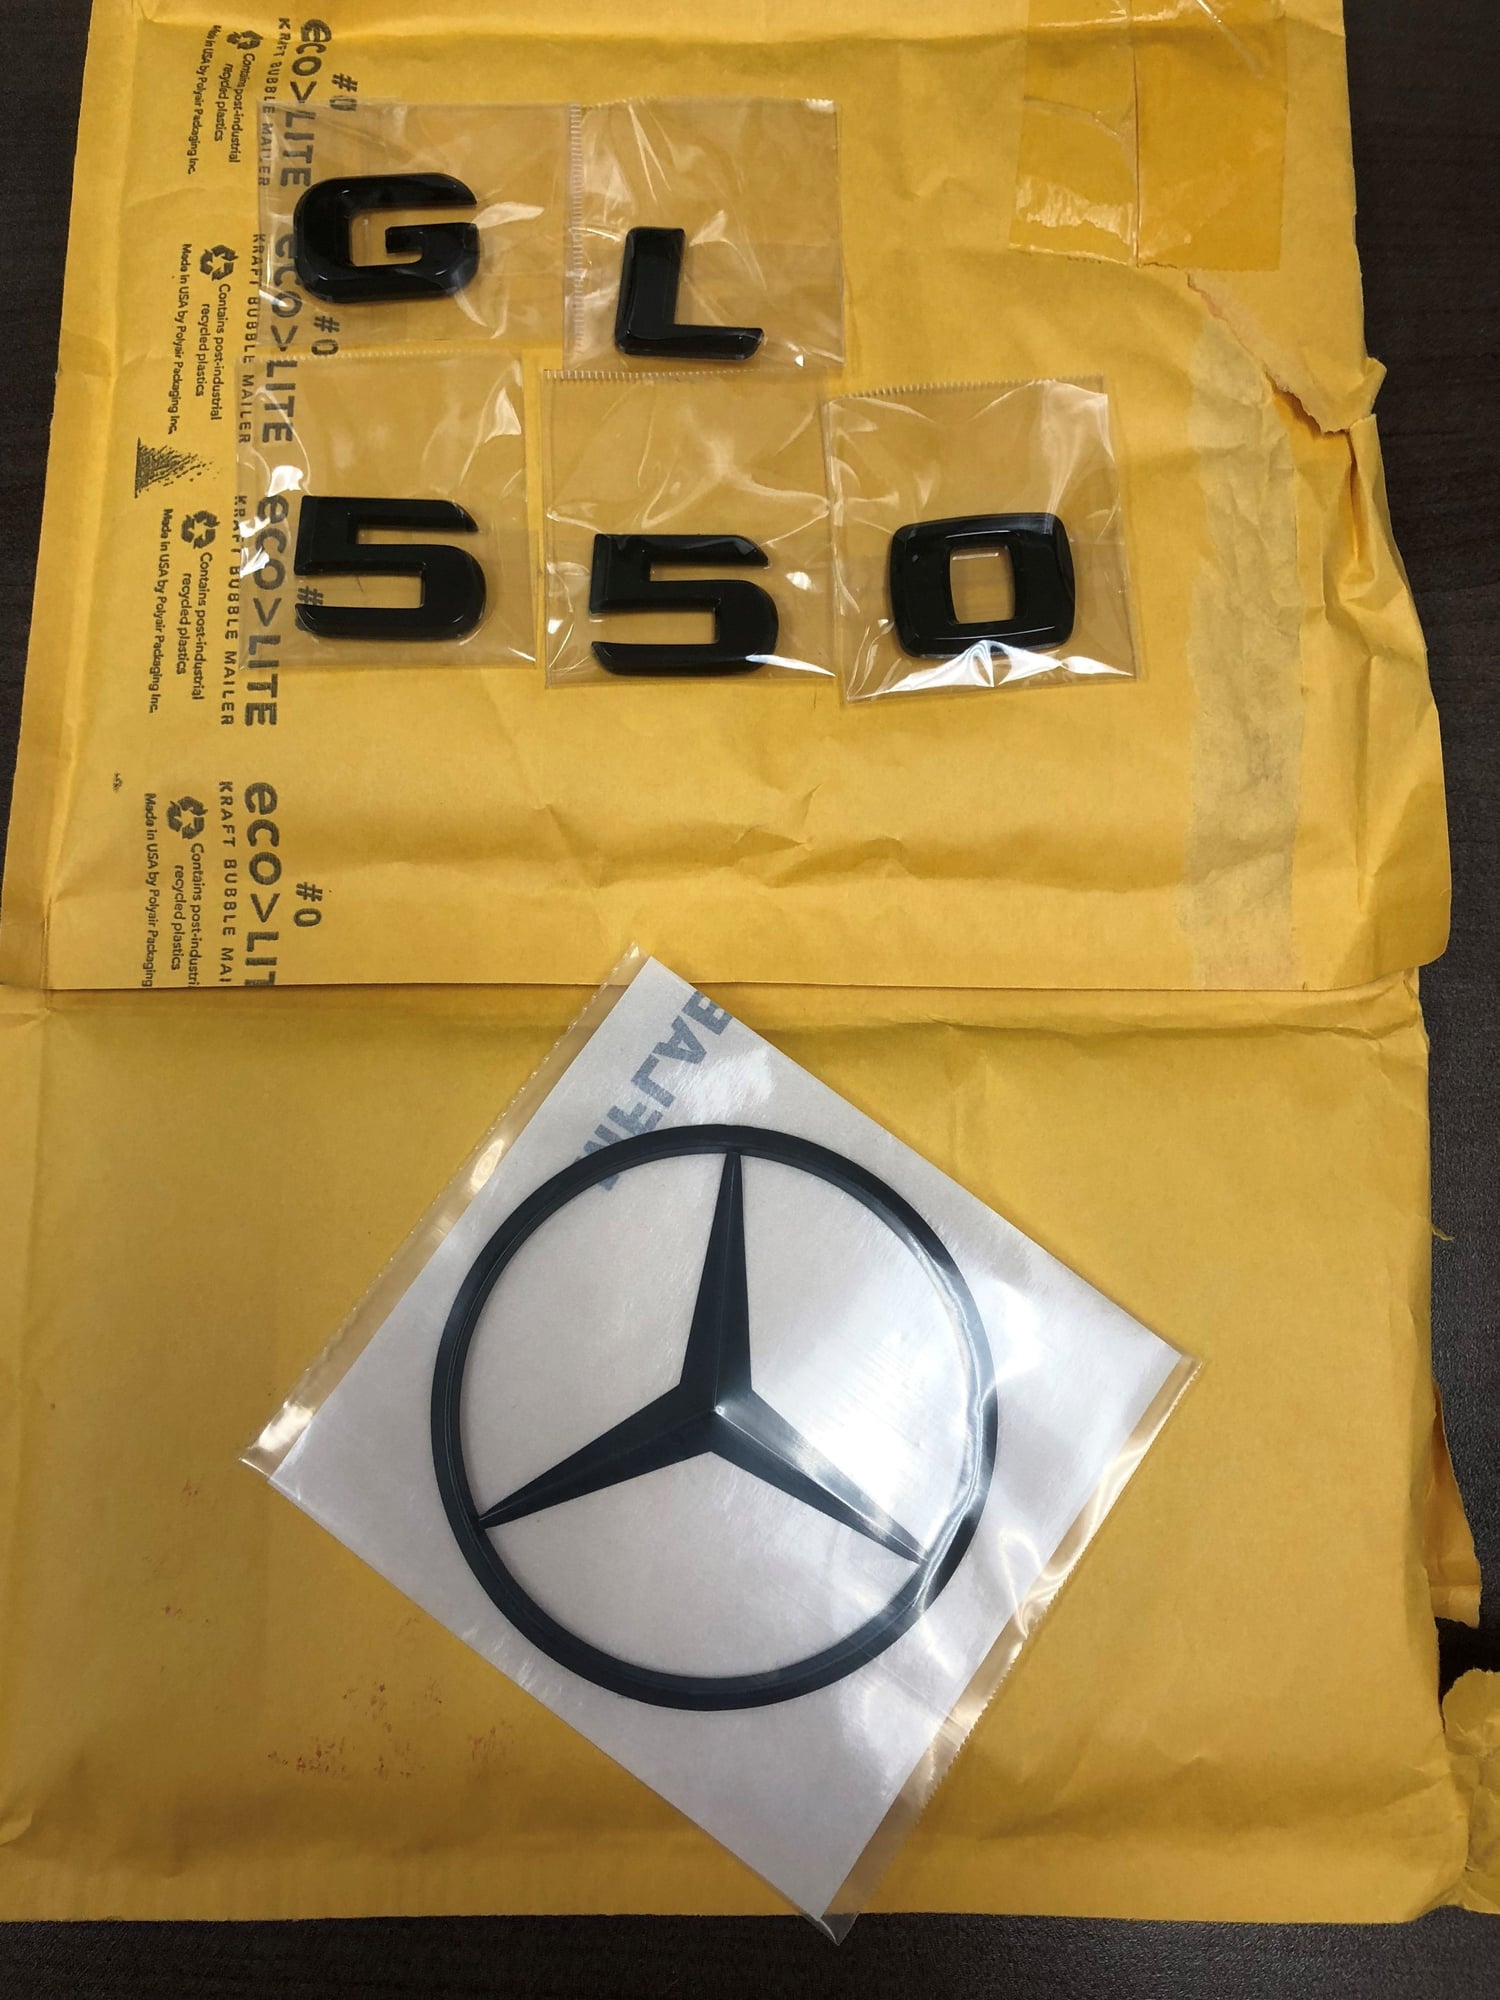 Exterior Body Parts - FS Gloss Black GL 550 Badge and Trunk Star - New - 2013 to 2015 Mercedes-Benz GL550 - Riverside, CA 92507, United States